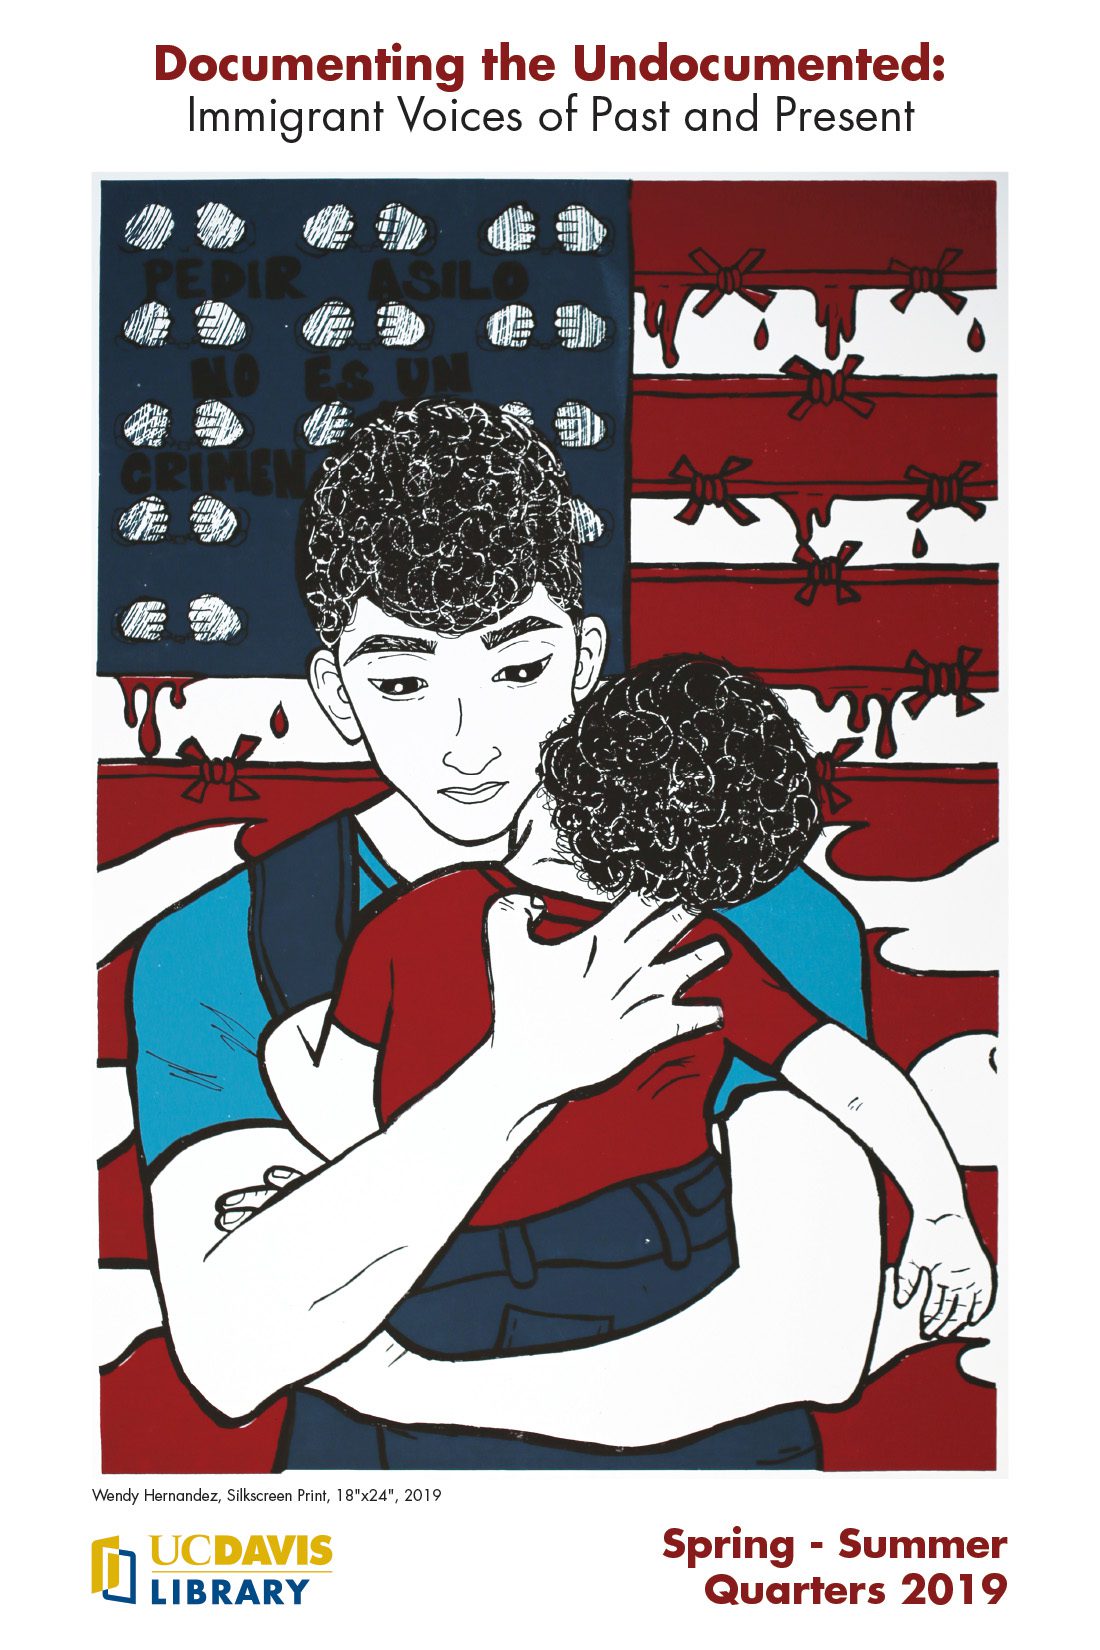 illustration of a man holding a child, with a barbed-wire lined American flag behind them